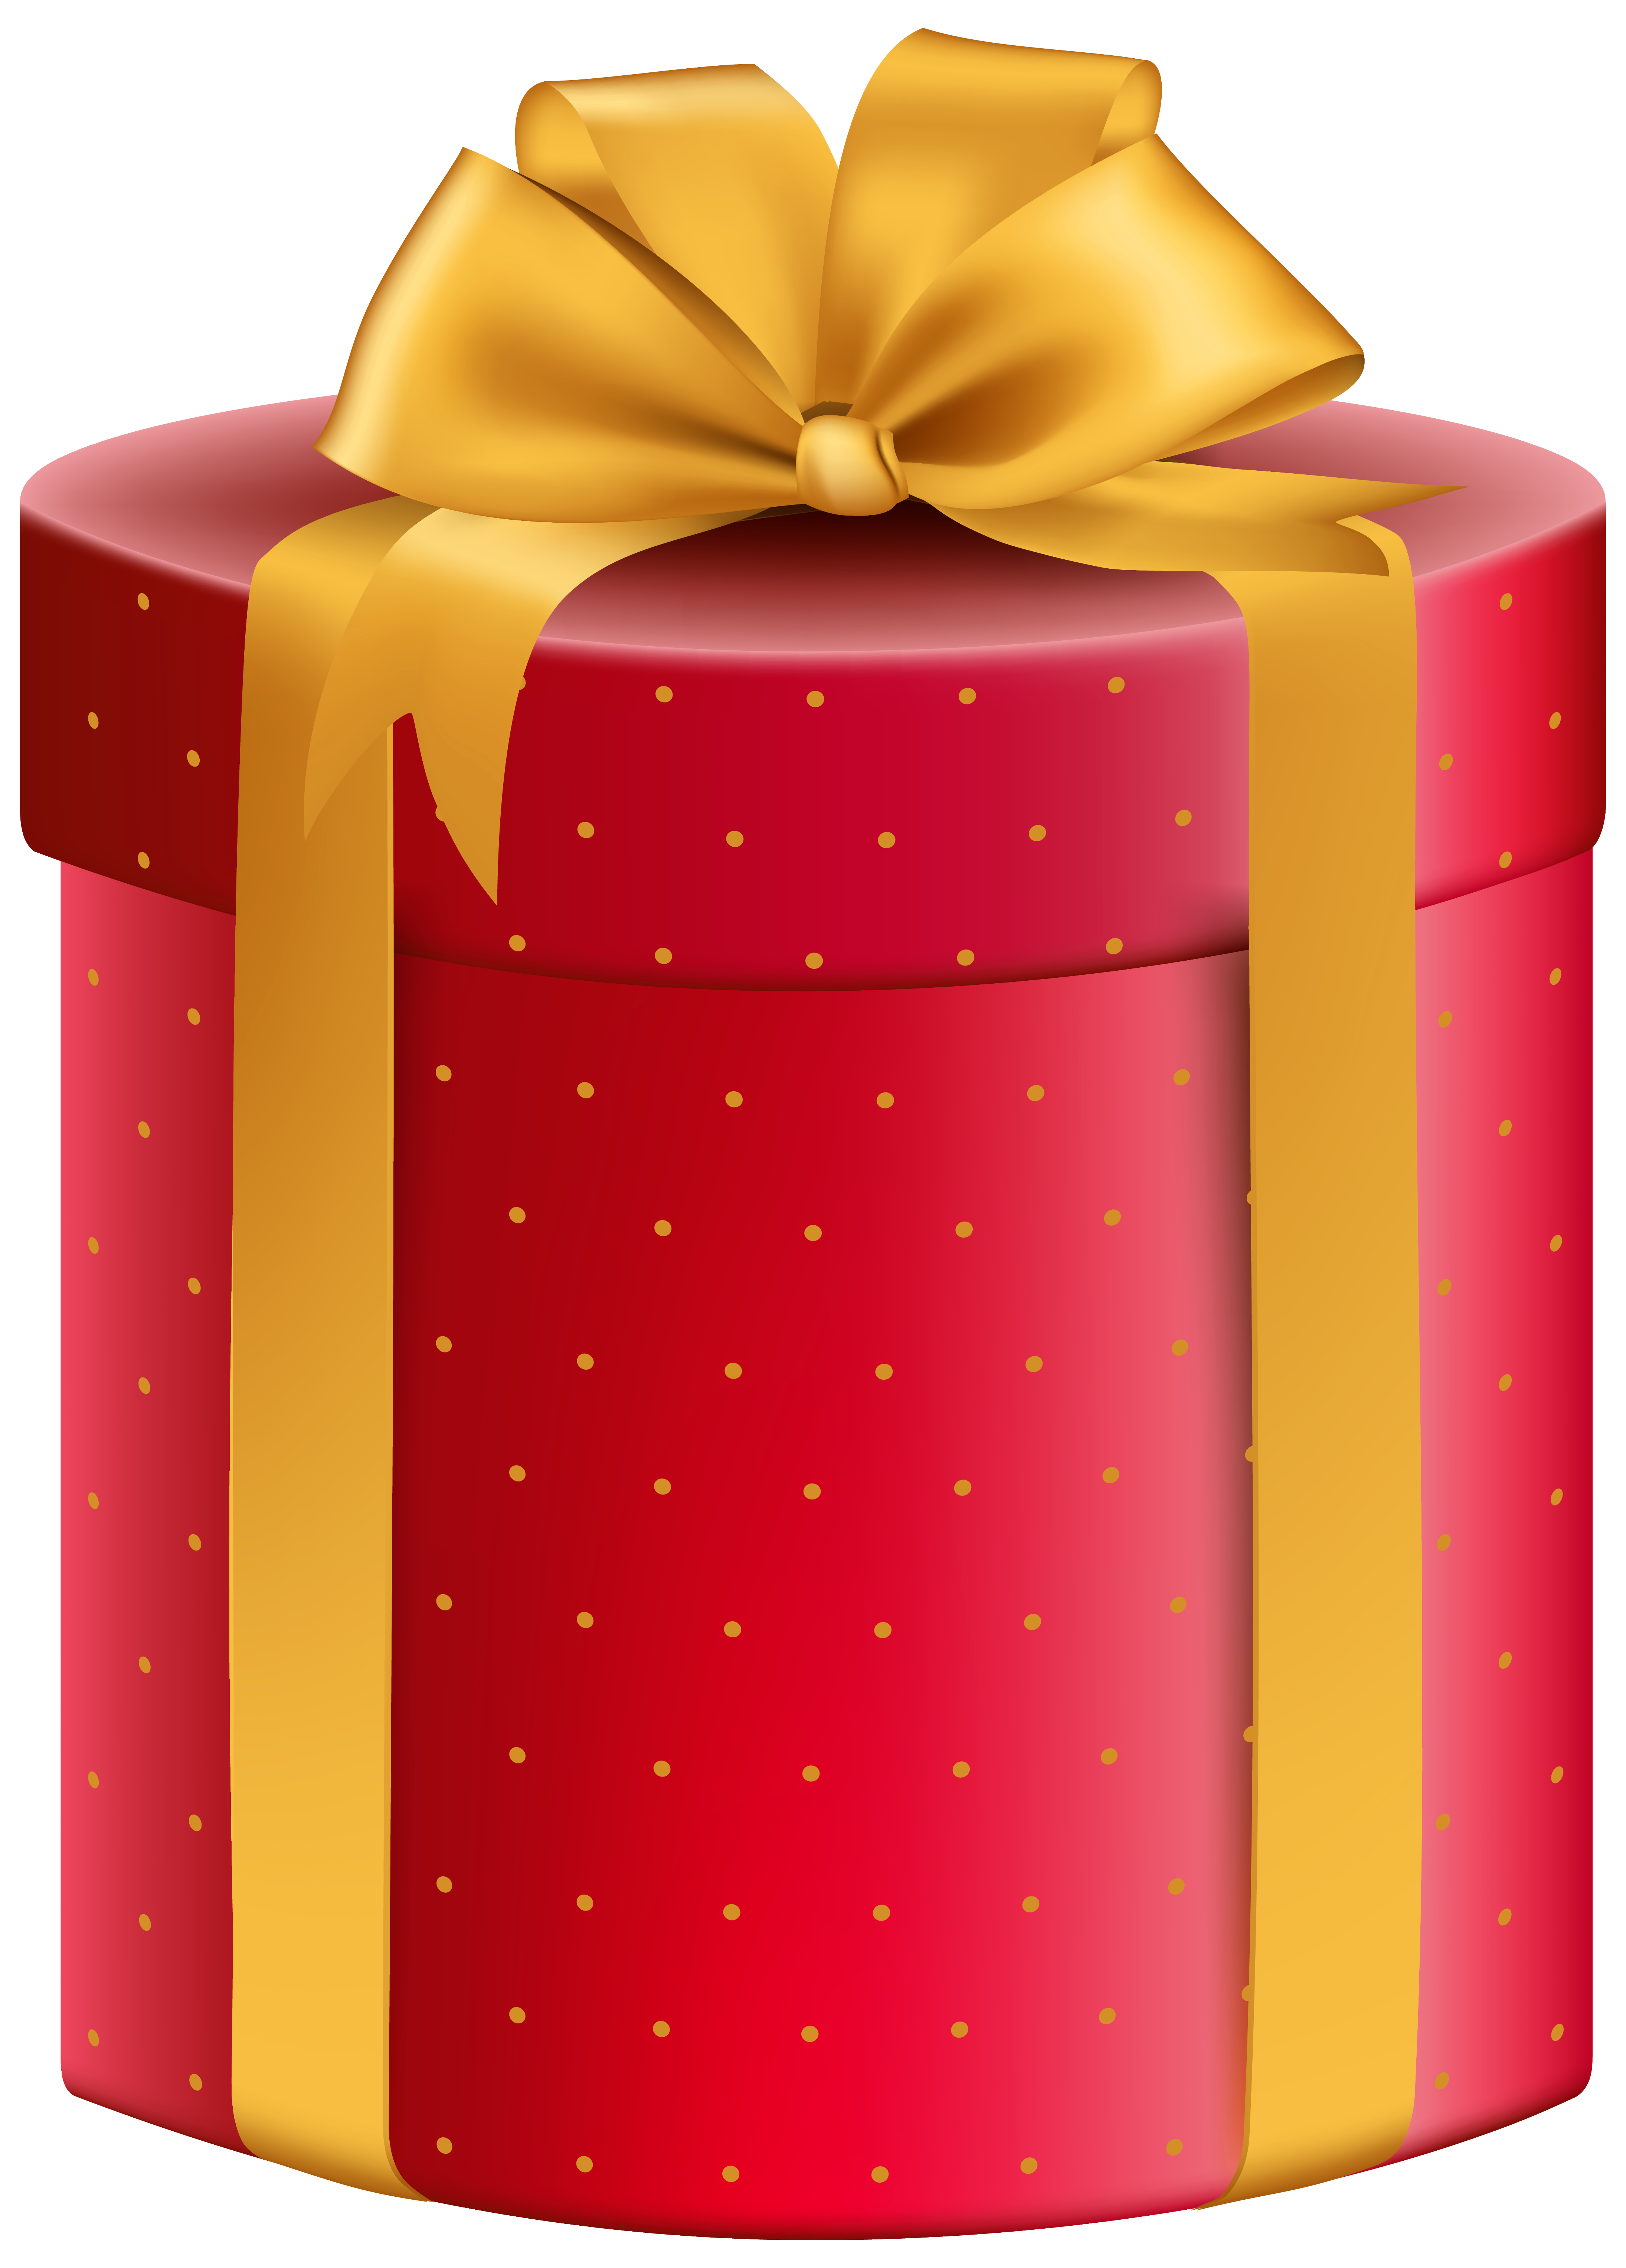 gift clipart yellow